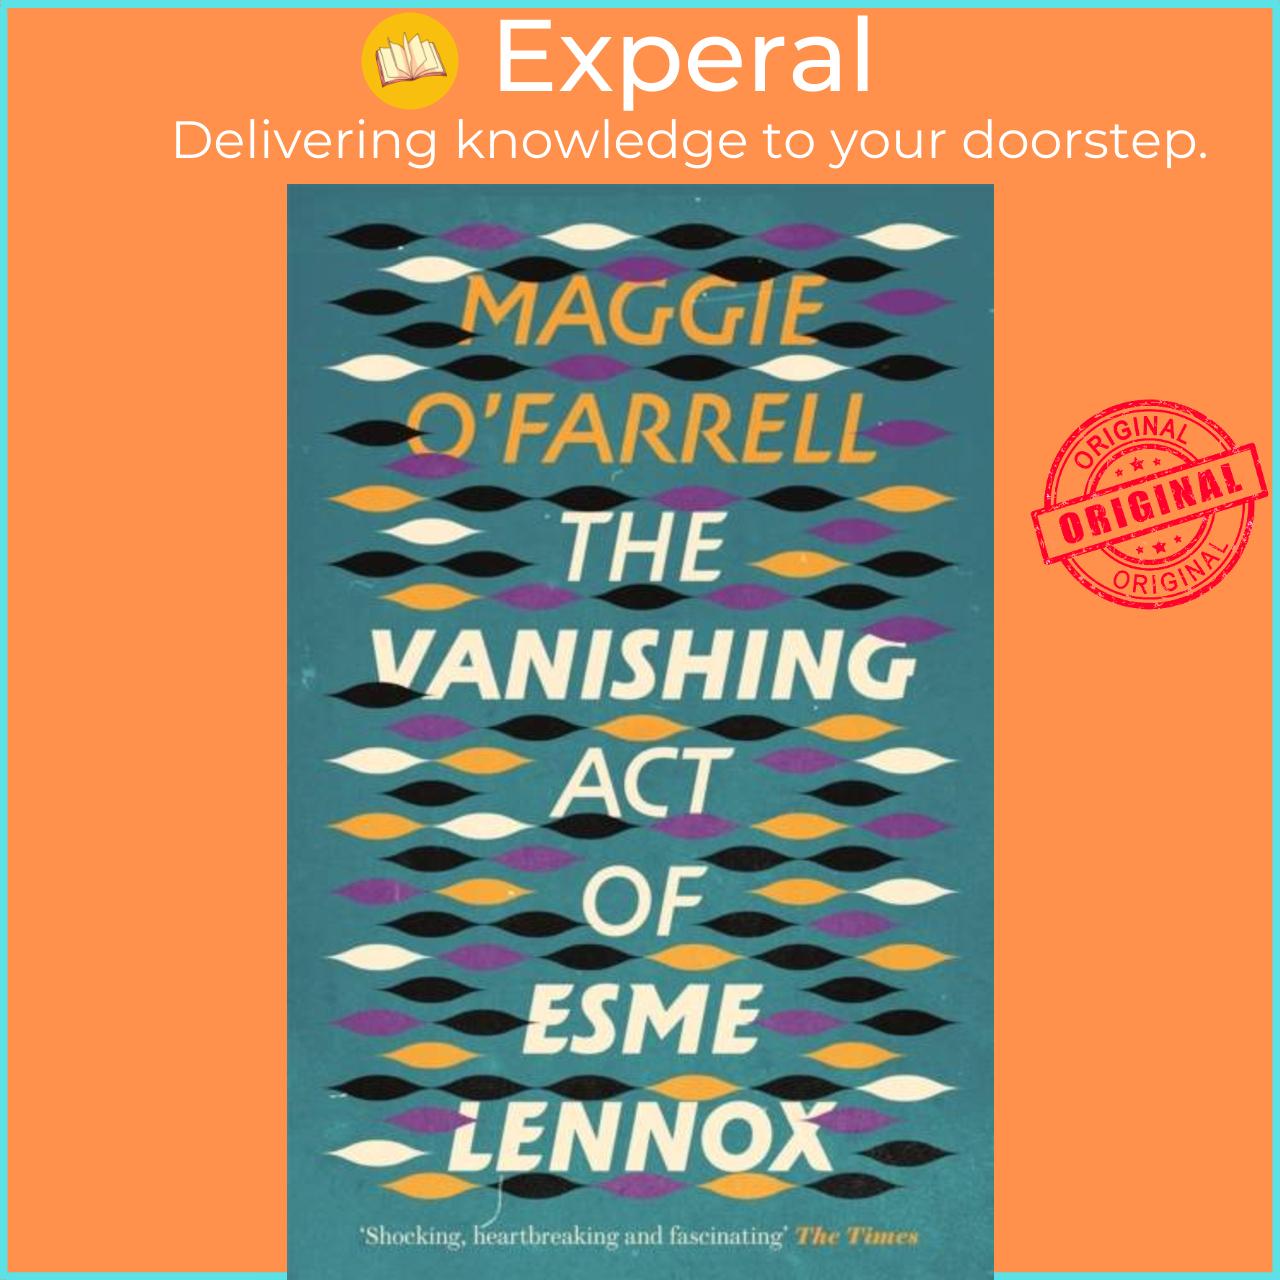 Sách - The Vanishing Act of Esme Lennox by Maggie O'Farrell (UK edition, paperback)